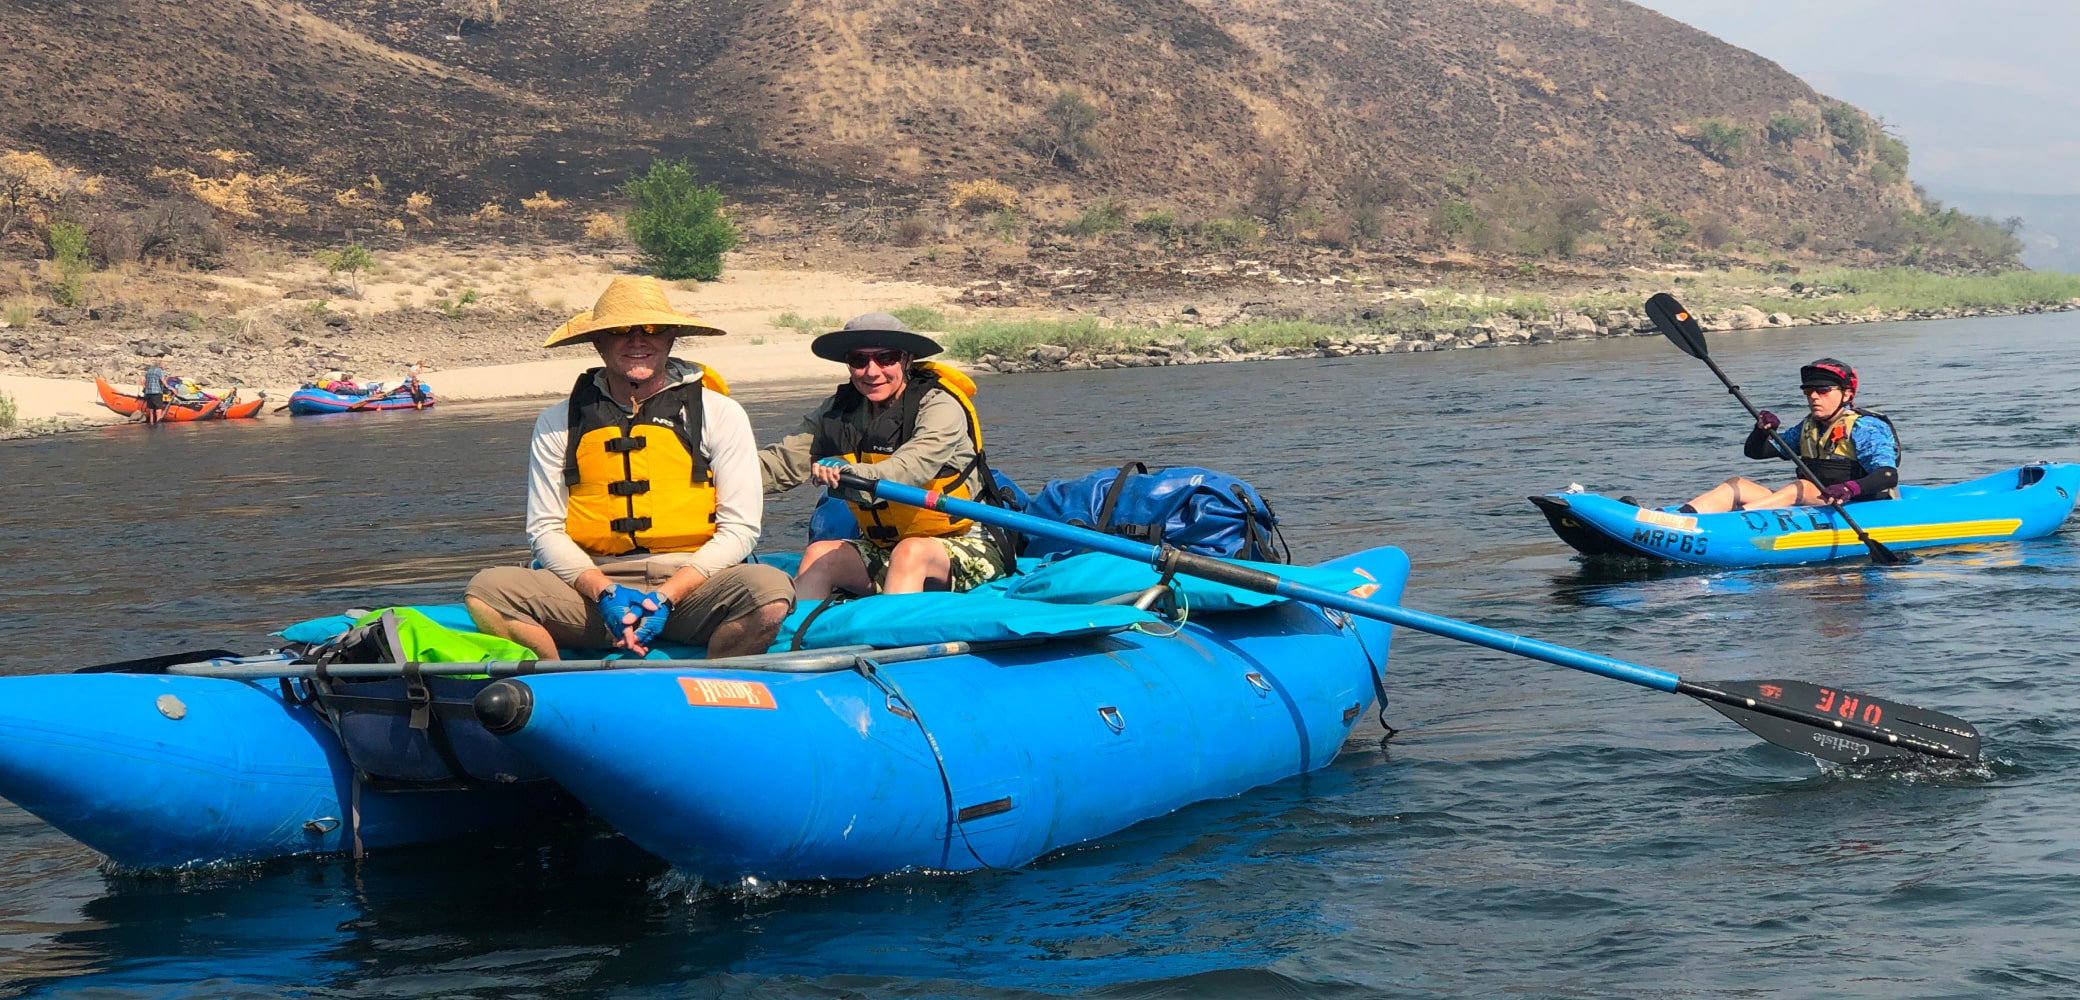 Two people in life vests ride atop a blue cataraft float in the river while another floats in a blue inflatable kayak.